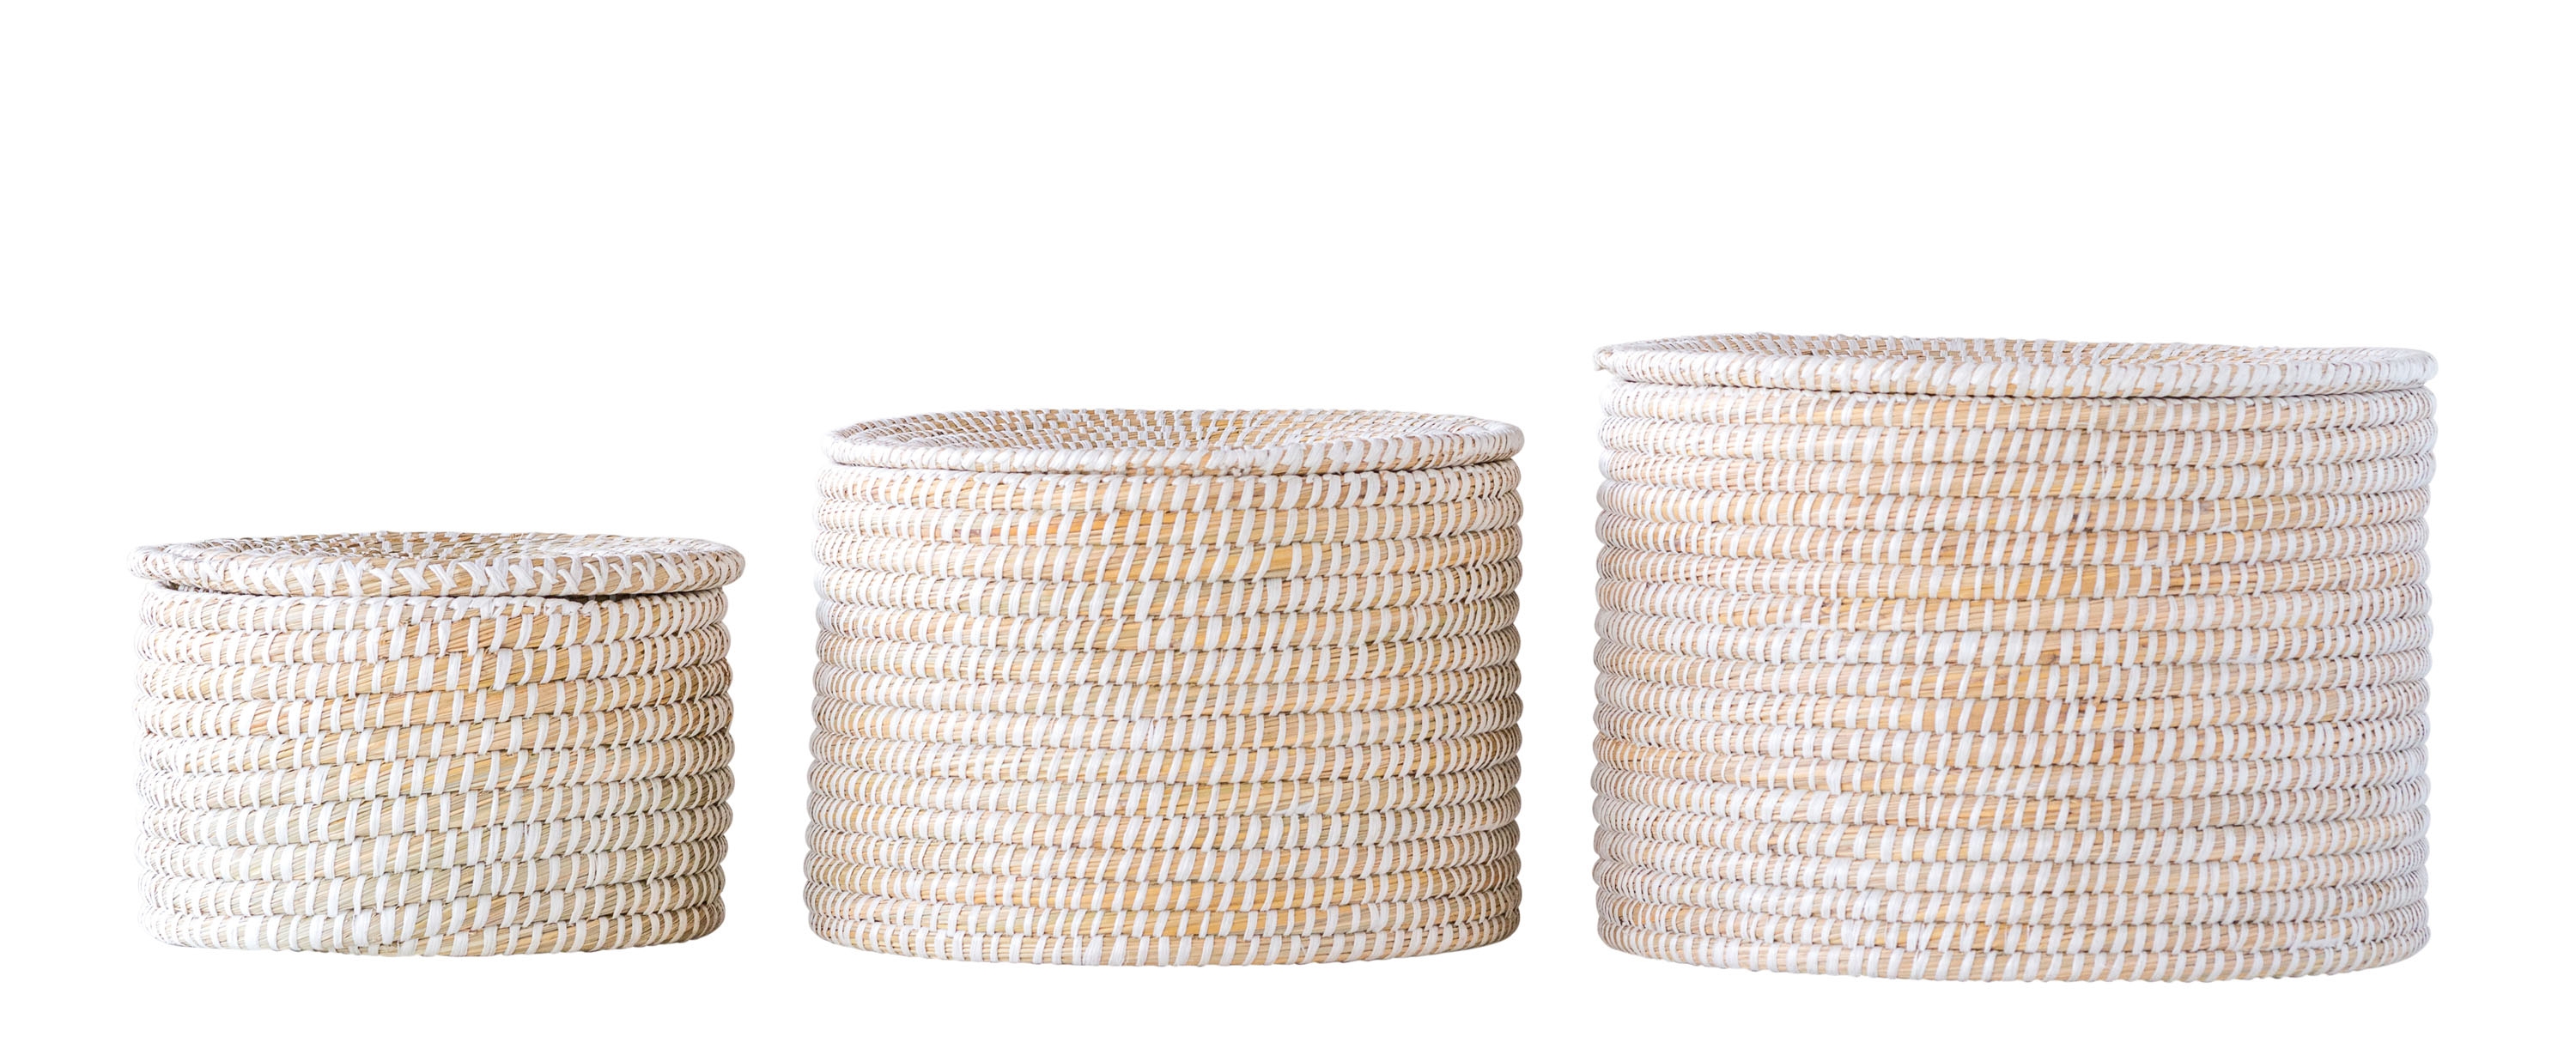 Whitewashed Woven Seagrass Baskets with Lids (Set of 3 Sizes) - Image 0